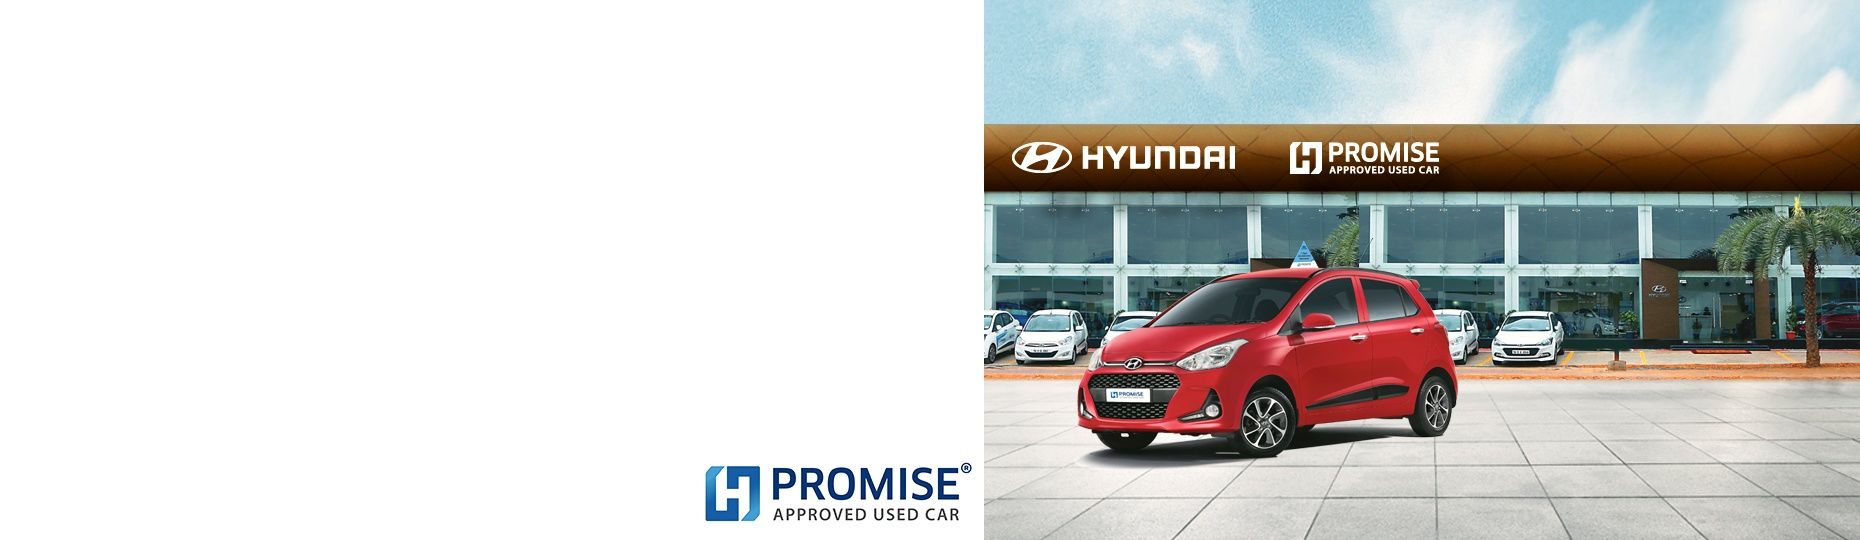 H Promise approved used cars